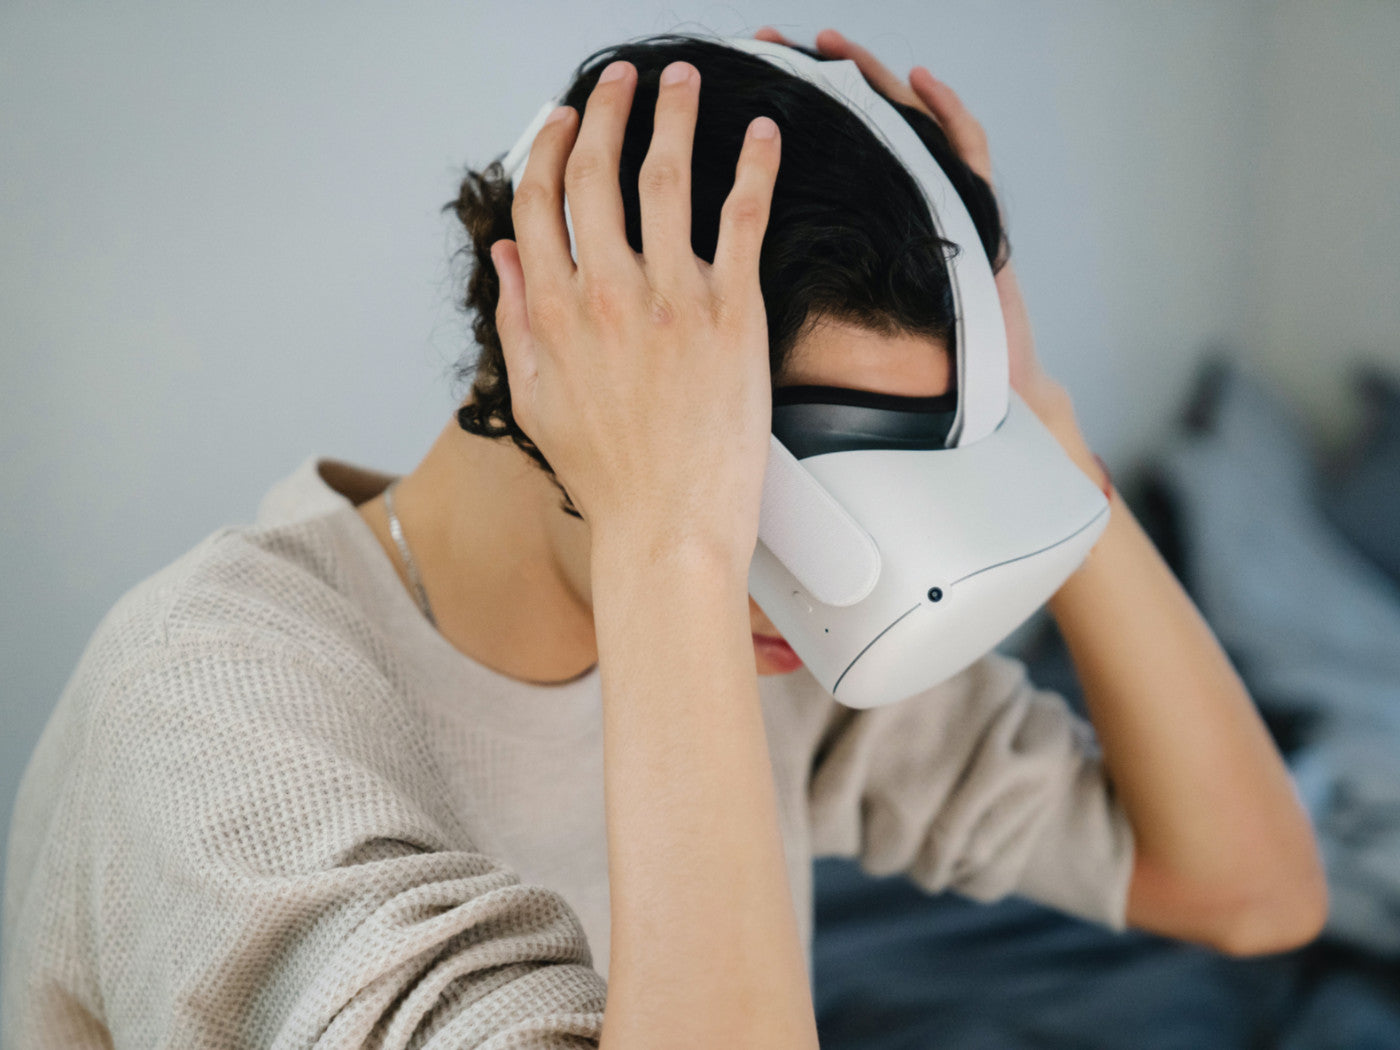 Practical Tips for Reducing Eye Strain While Using VR